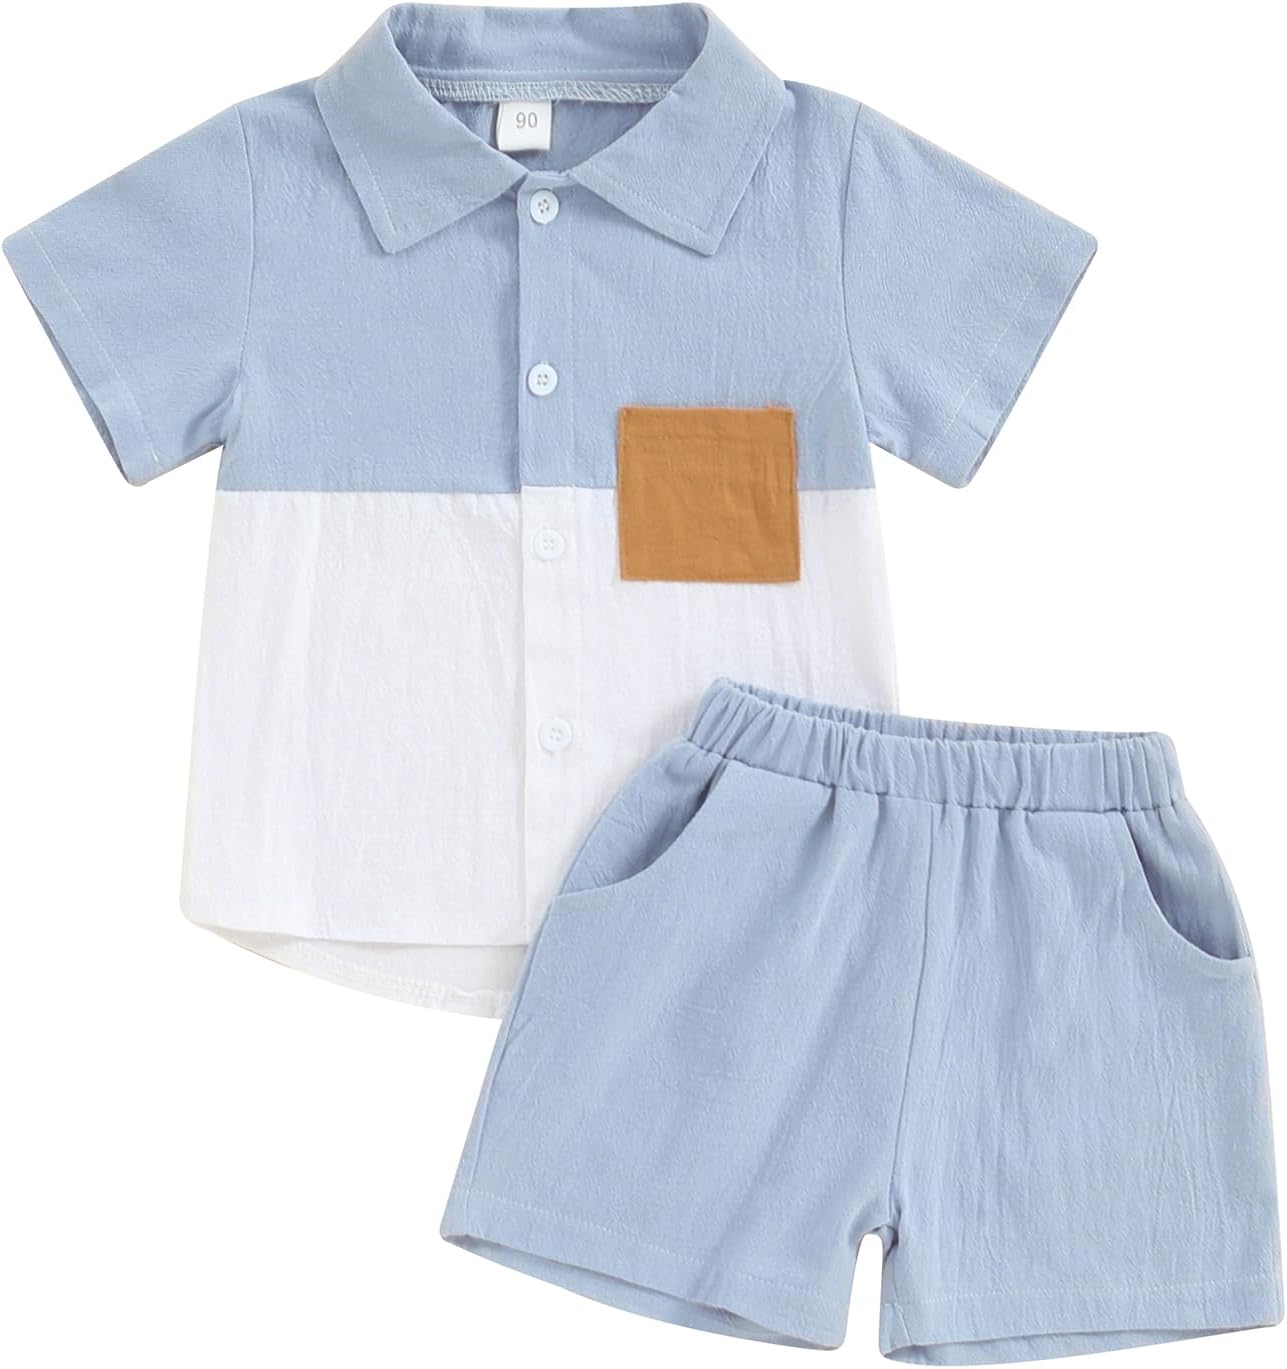 fhutpw Toddler Boy Patchwork Summer Outfits Short Sleeve Button Down Shirt Tops & Casual Shorts Sets Baby 2T 3T 4T 5T Clothes